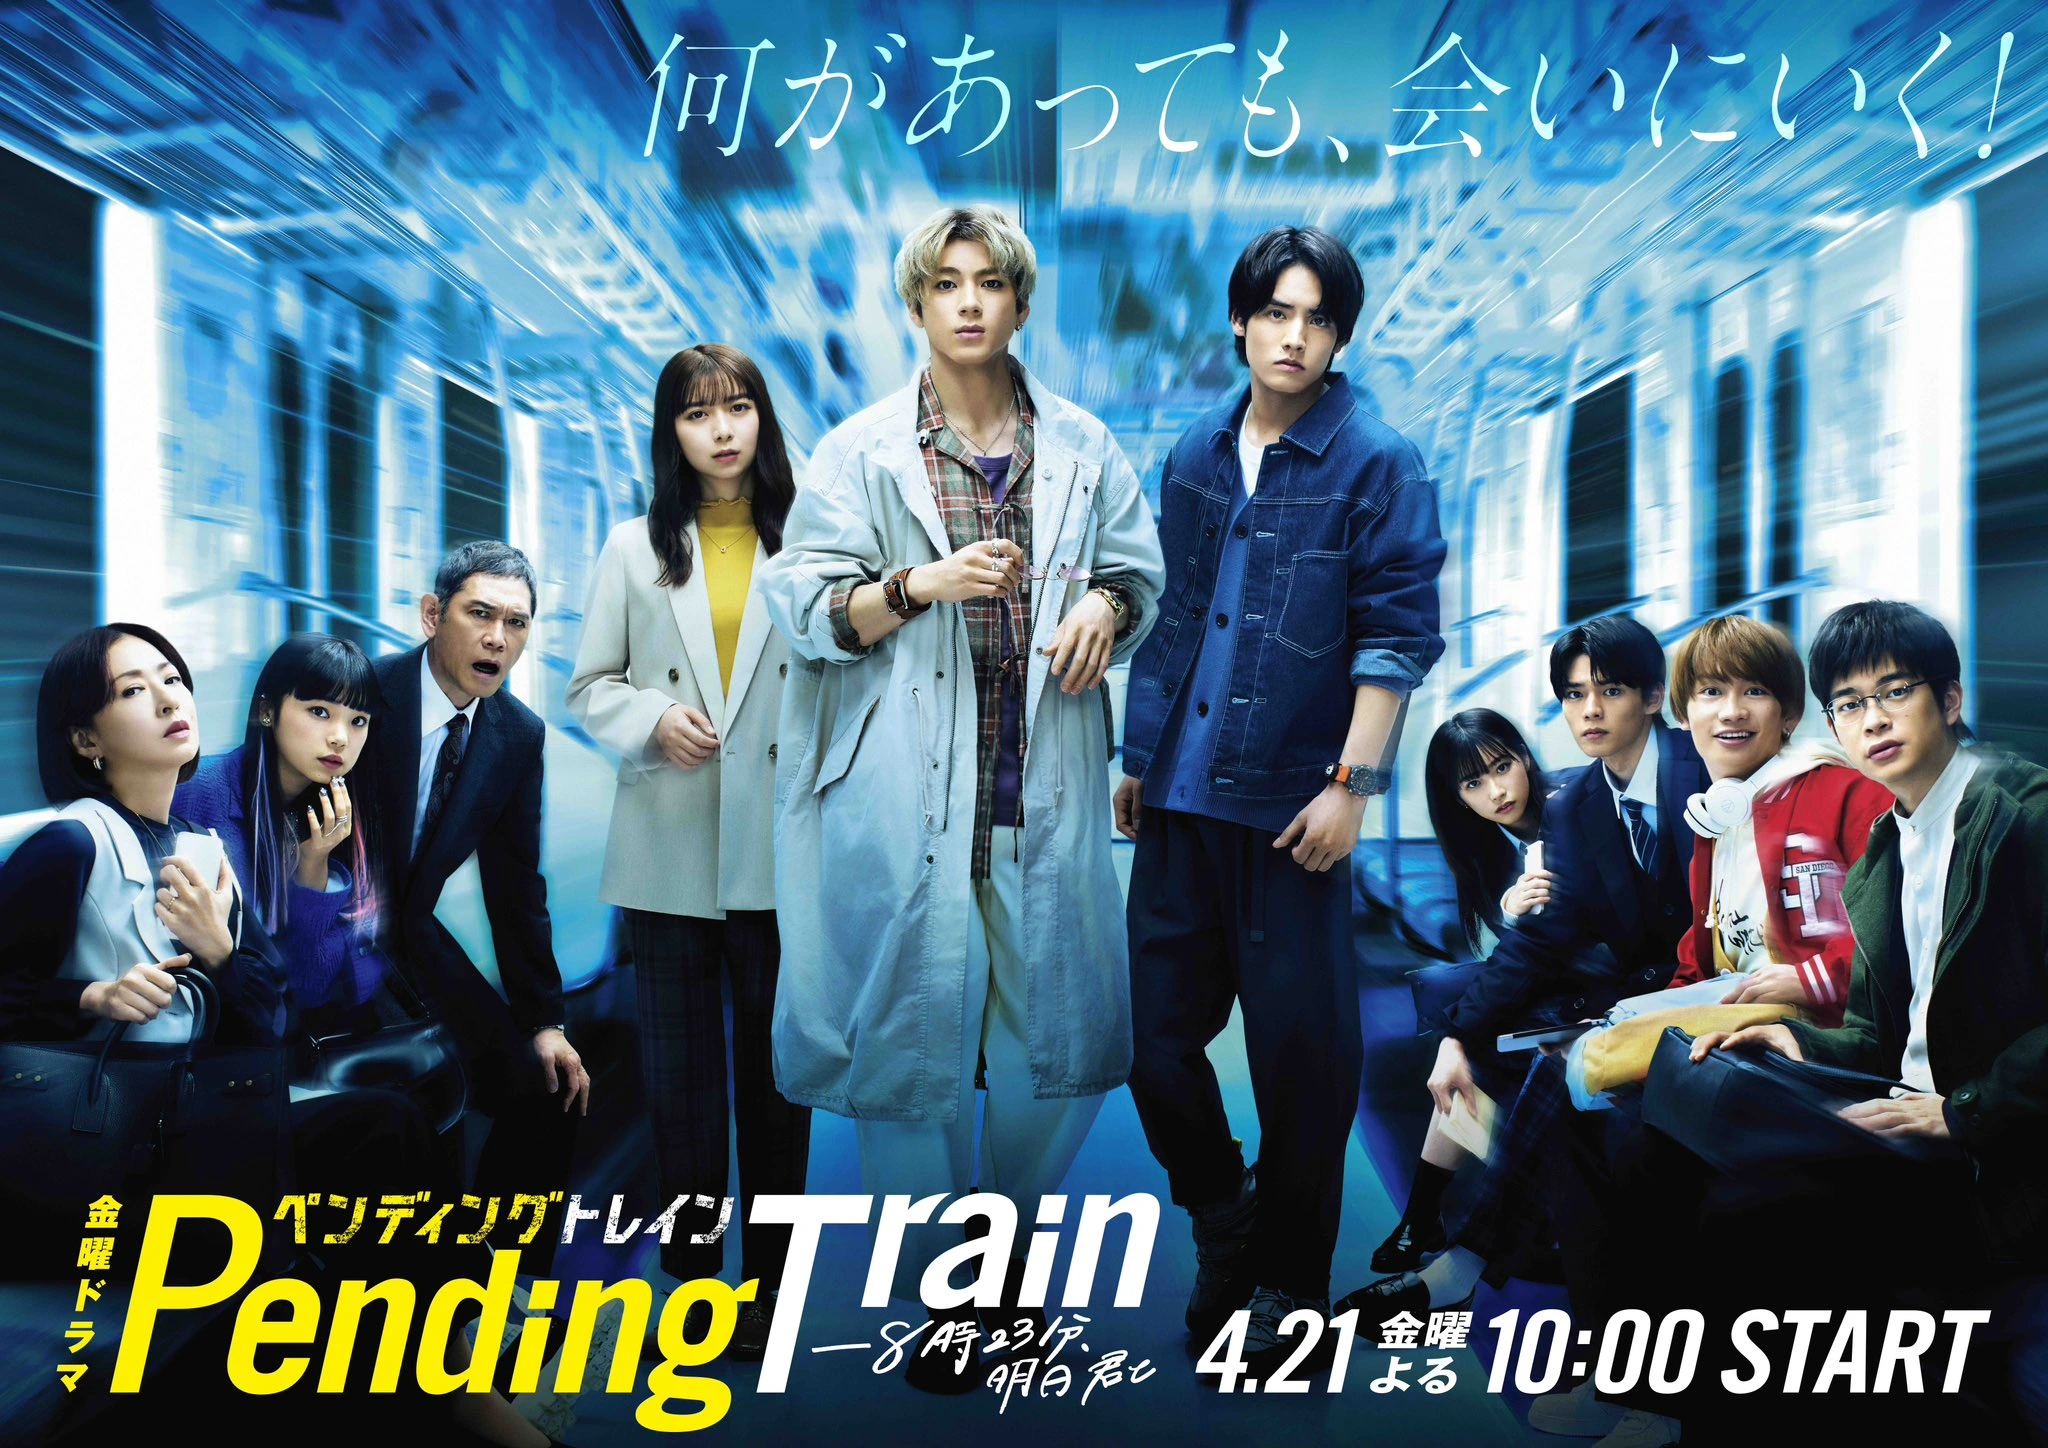 Pending Train: 8:23, Tomorrow With You.